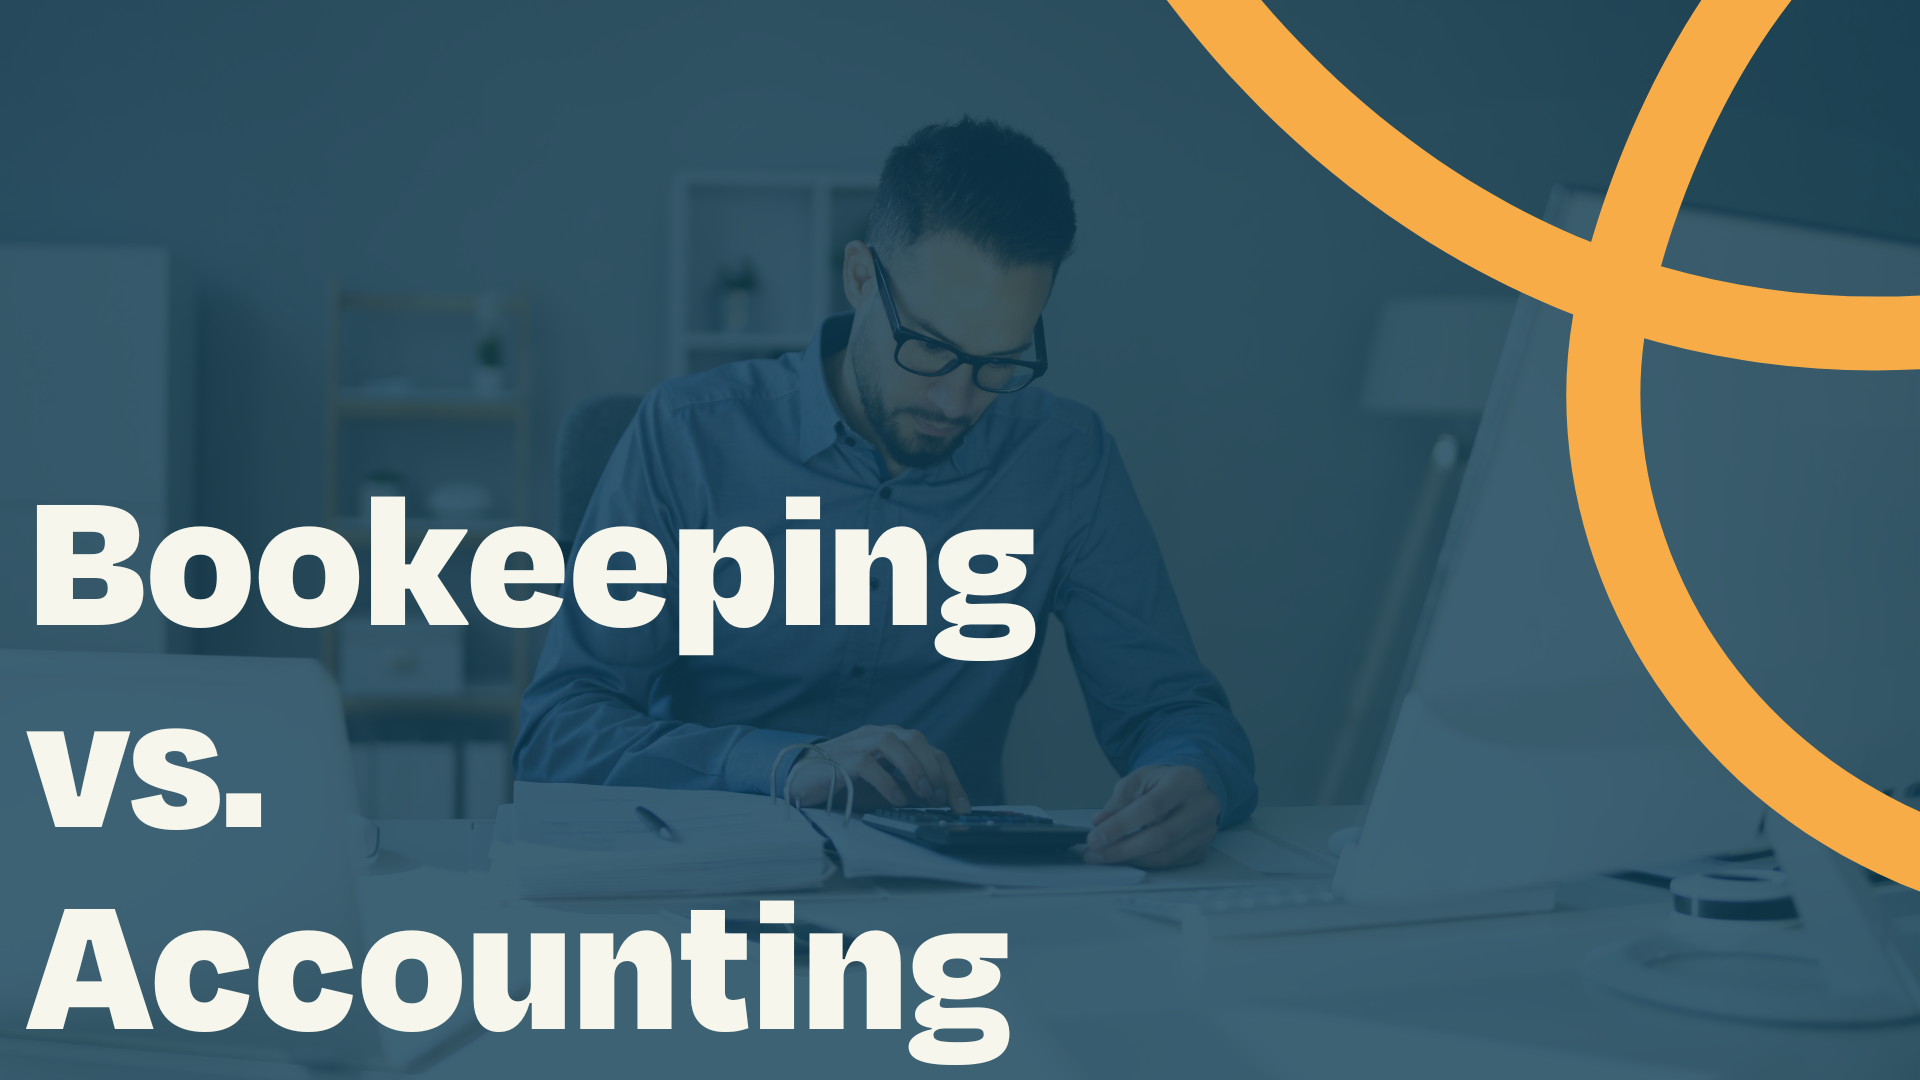 Discover the differences between bookkeeping and accounting with our in-depth guide.